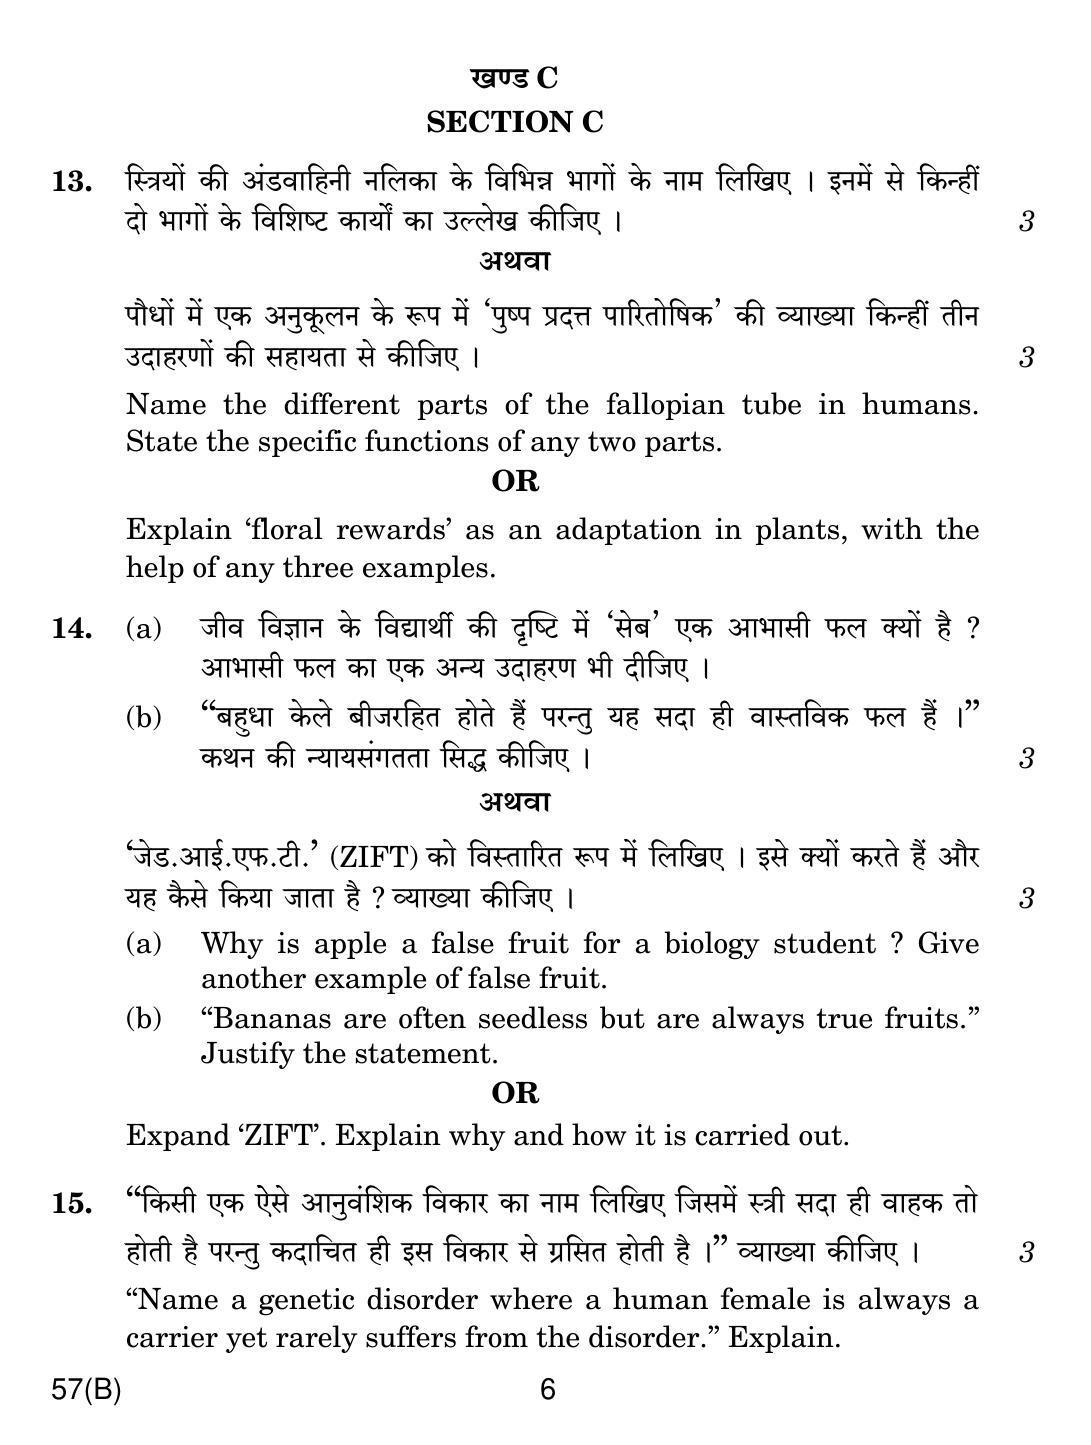 CBSE Class 12 57(B) Biology For Blind 2019 Question Paper - Page 6